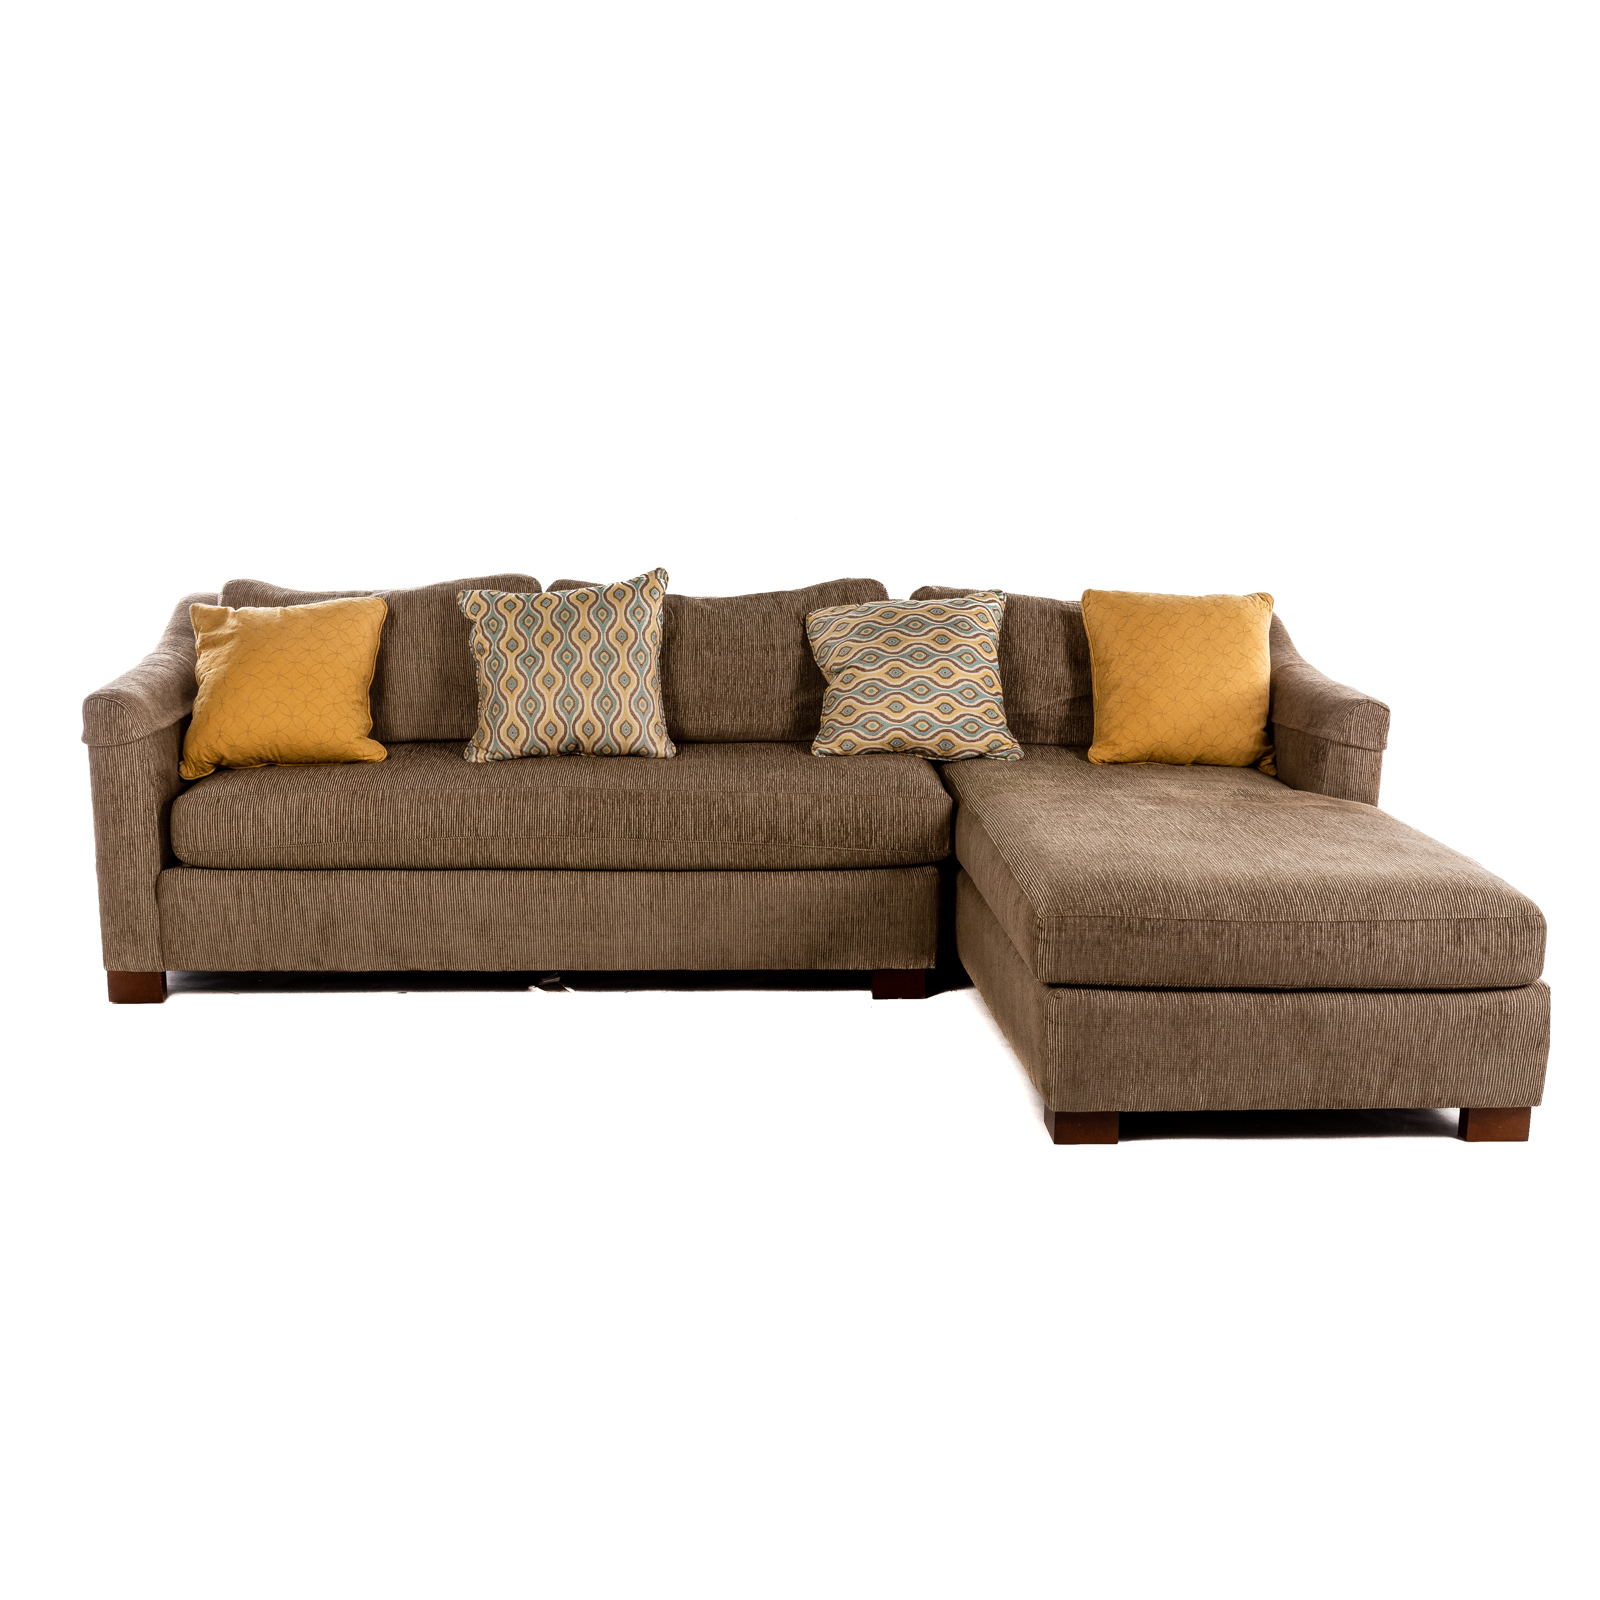 SHERILL UPHOLSTERED SOFA WITH CHAISE